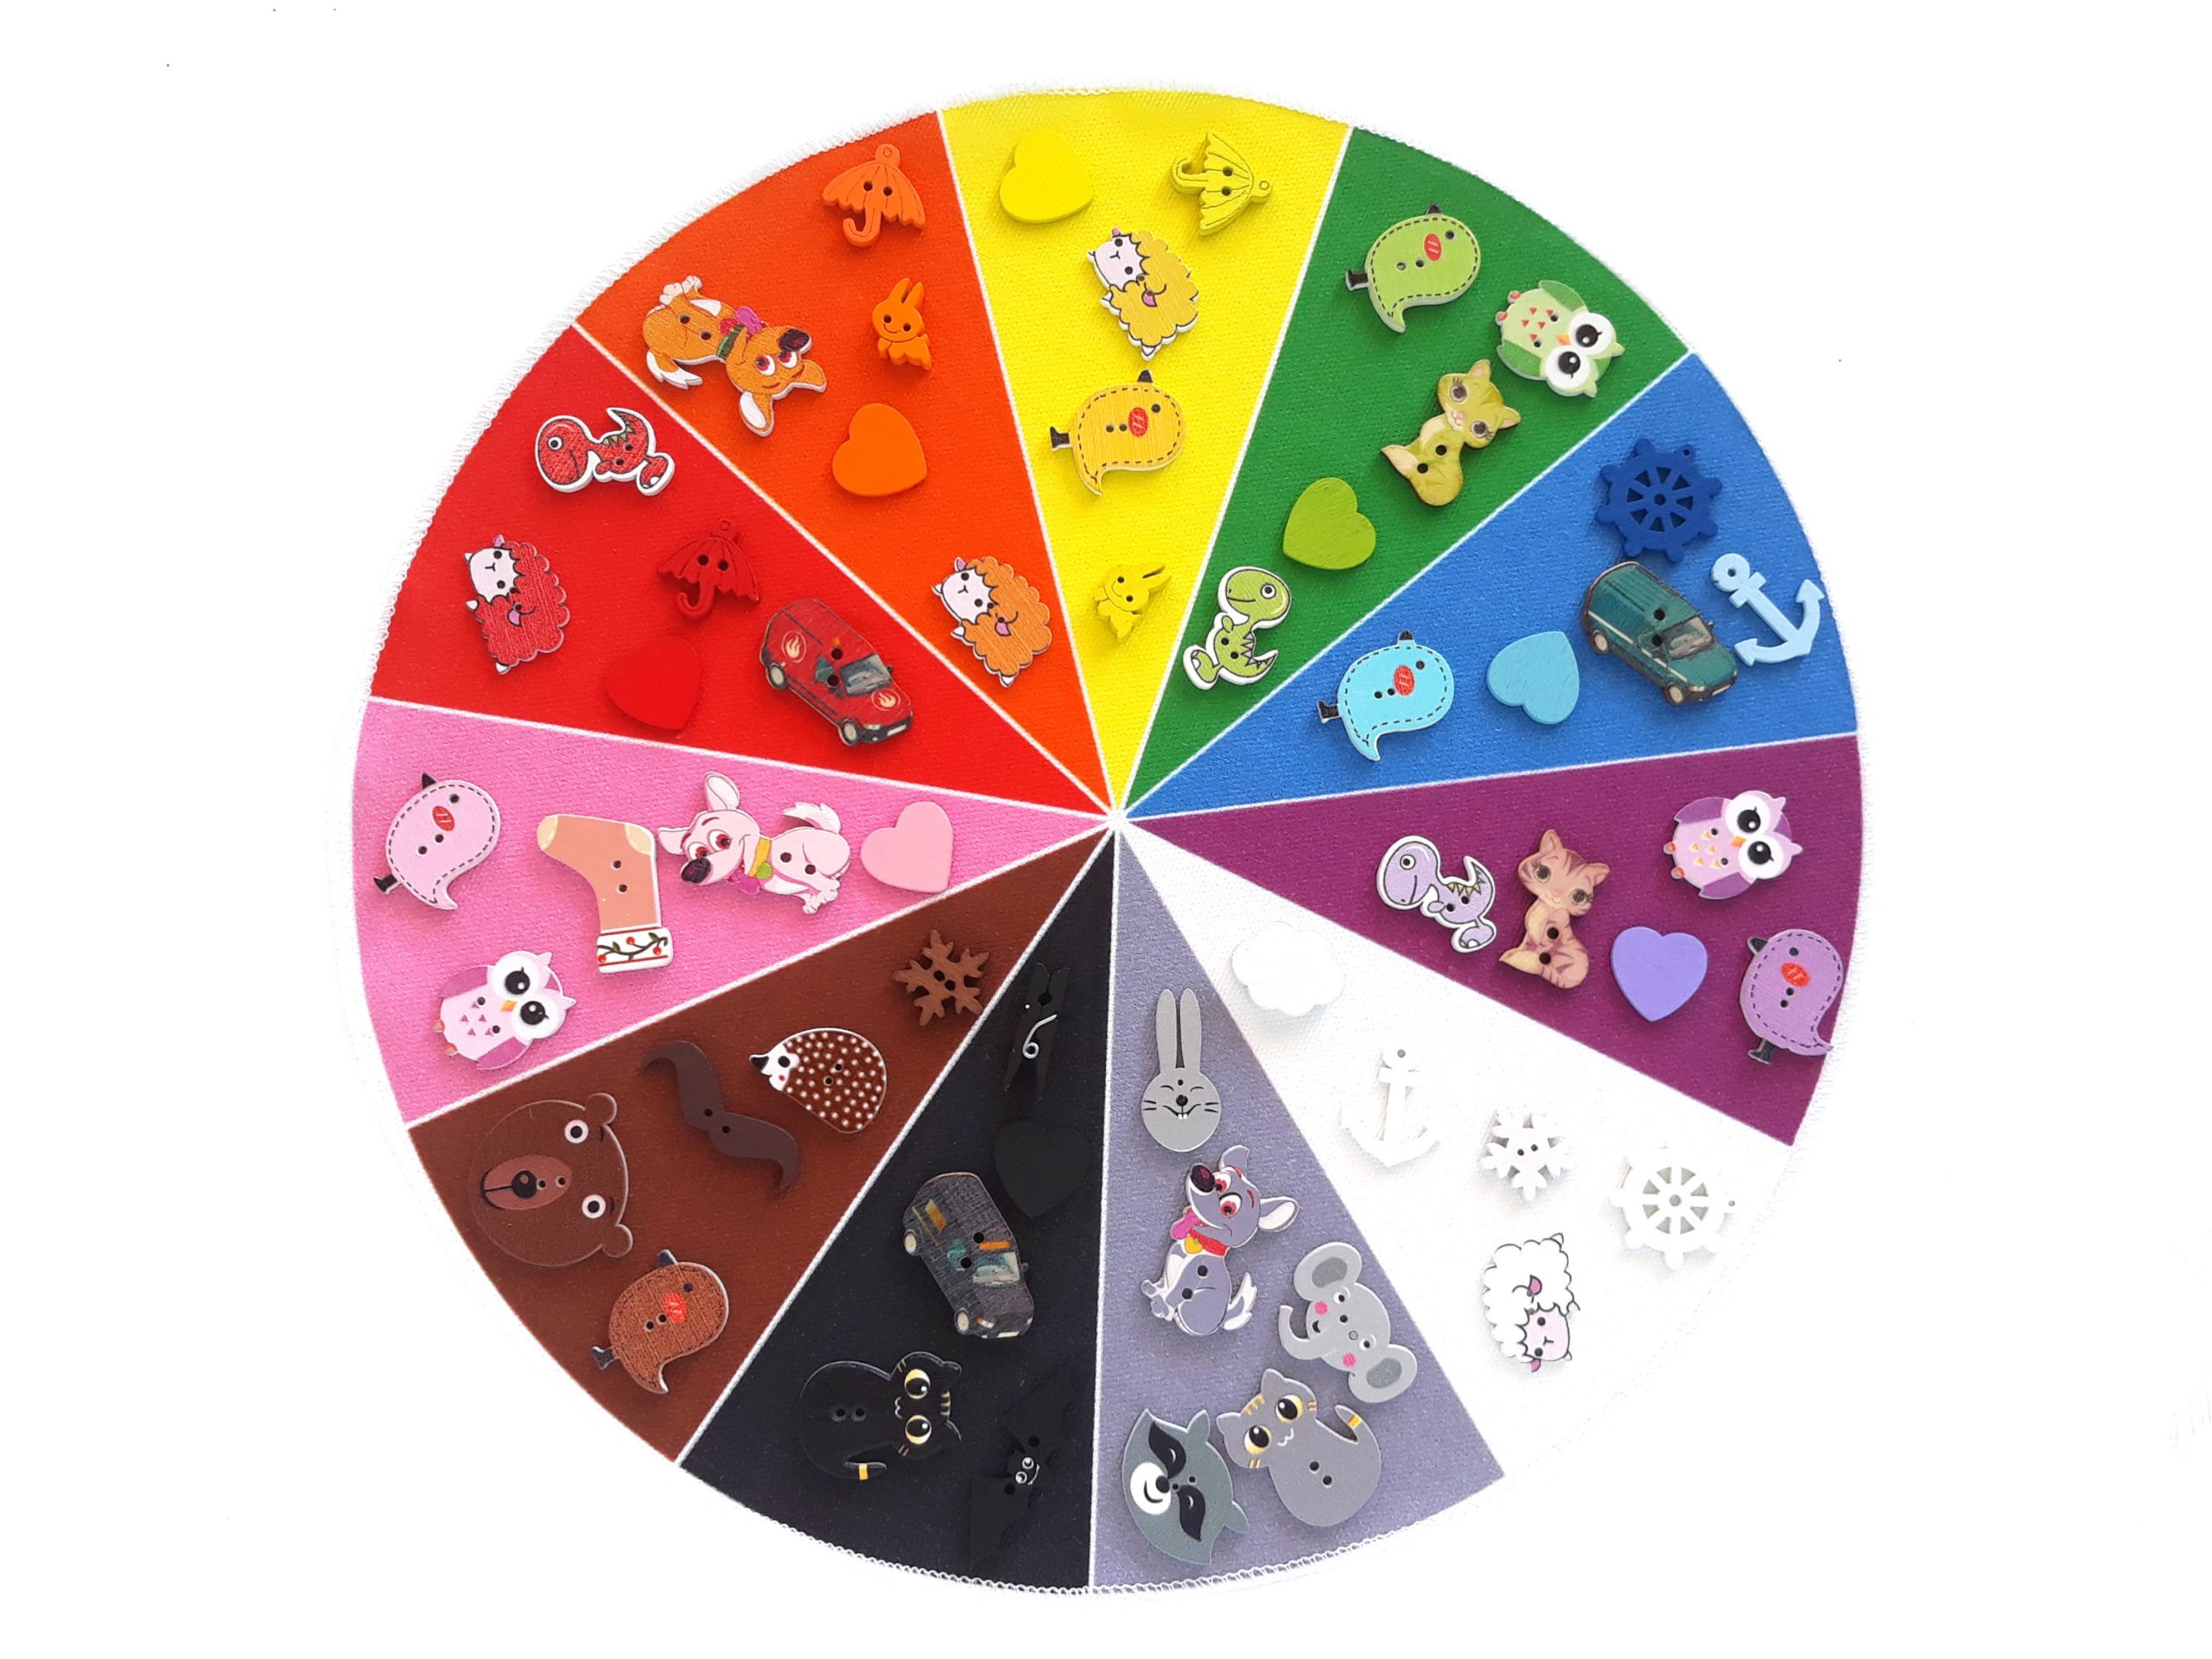 color sorting wheel 11 collors and wooden objects